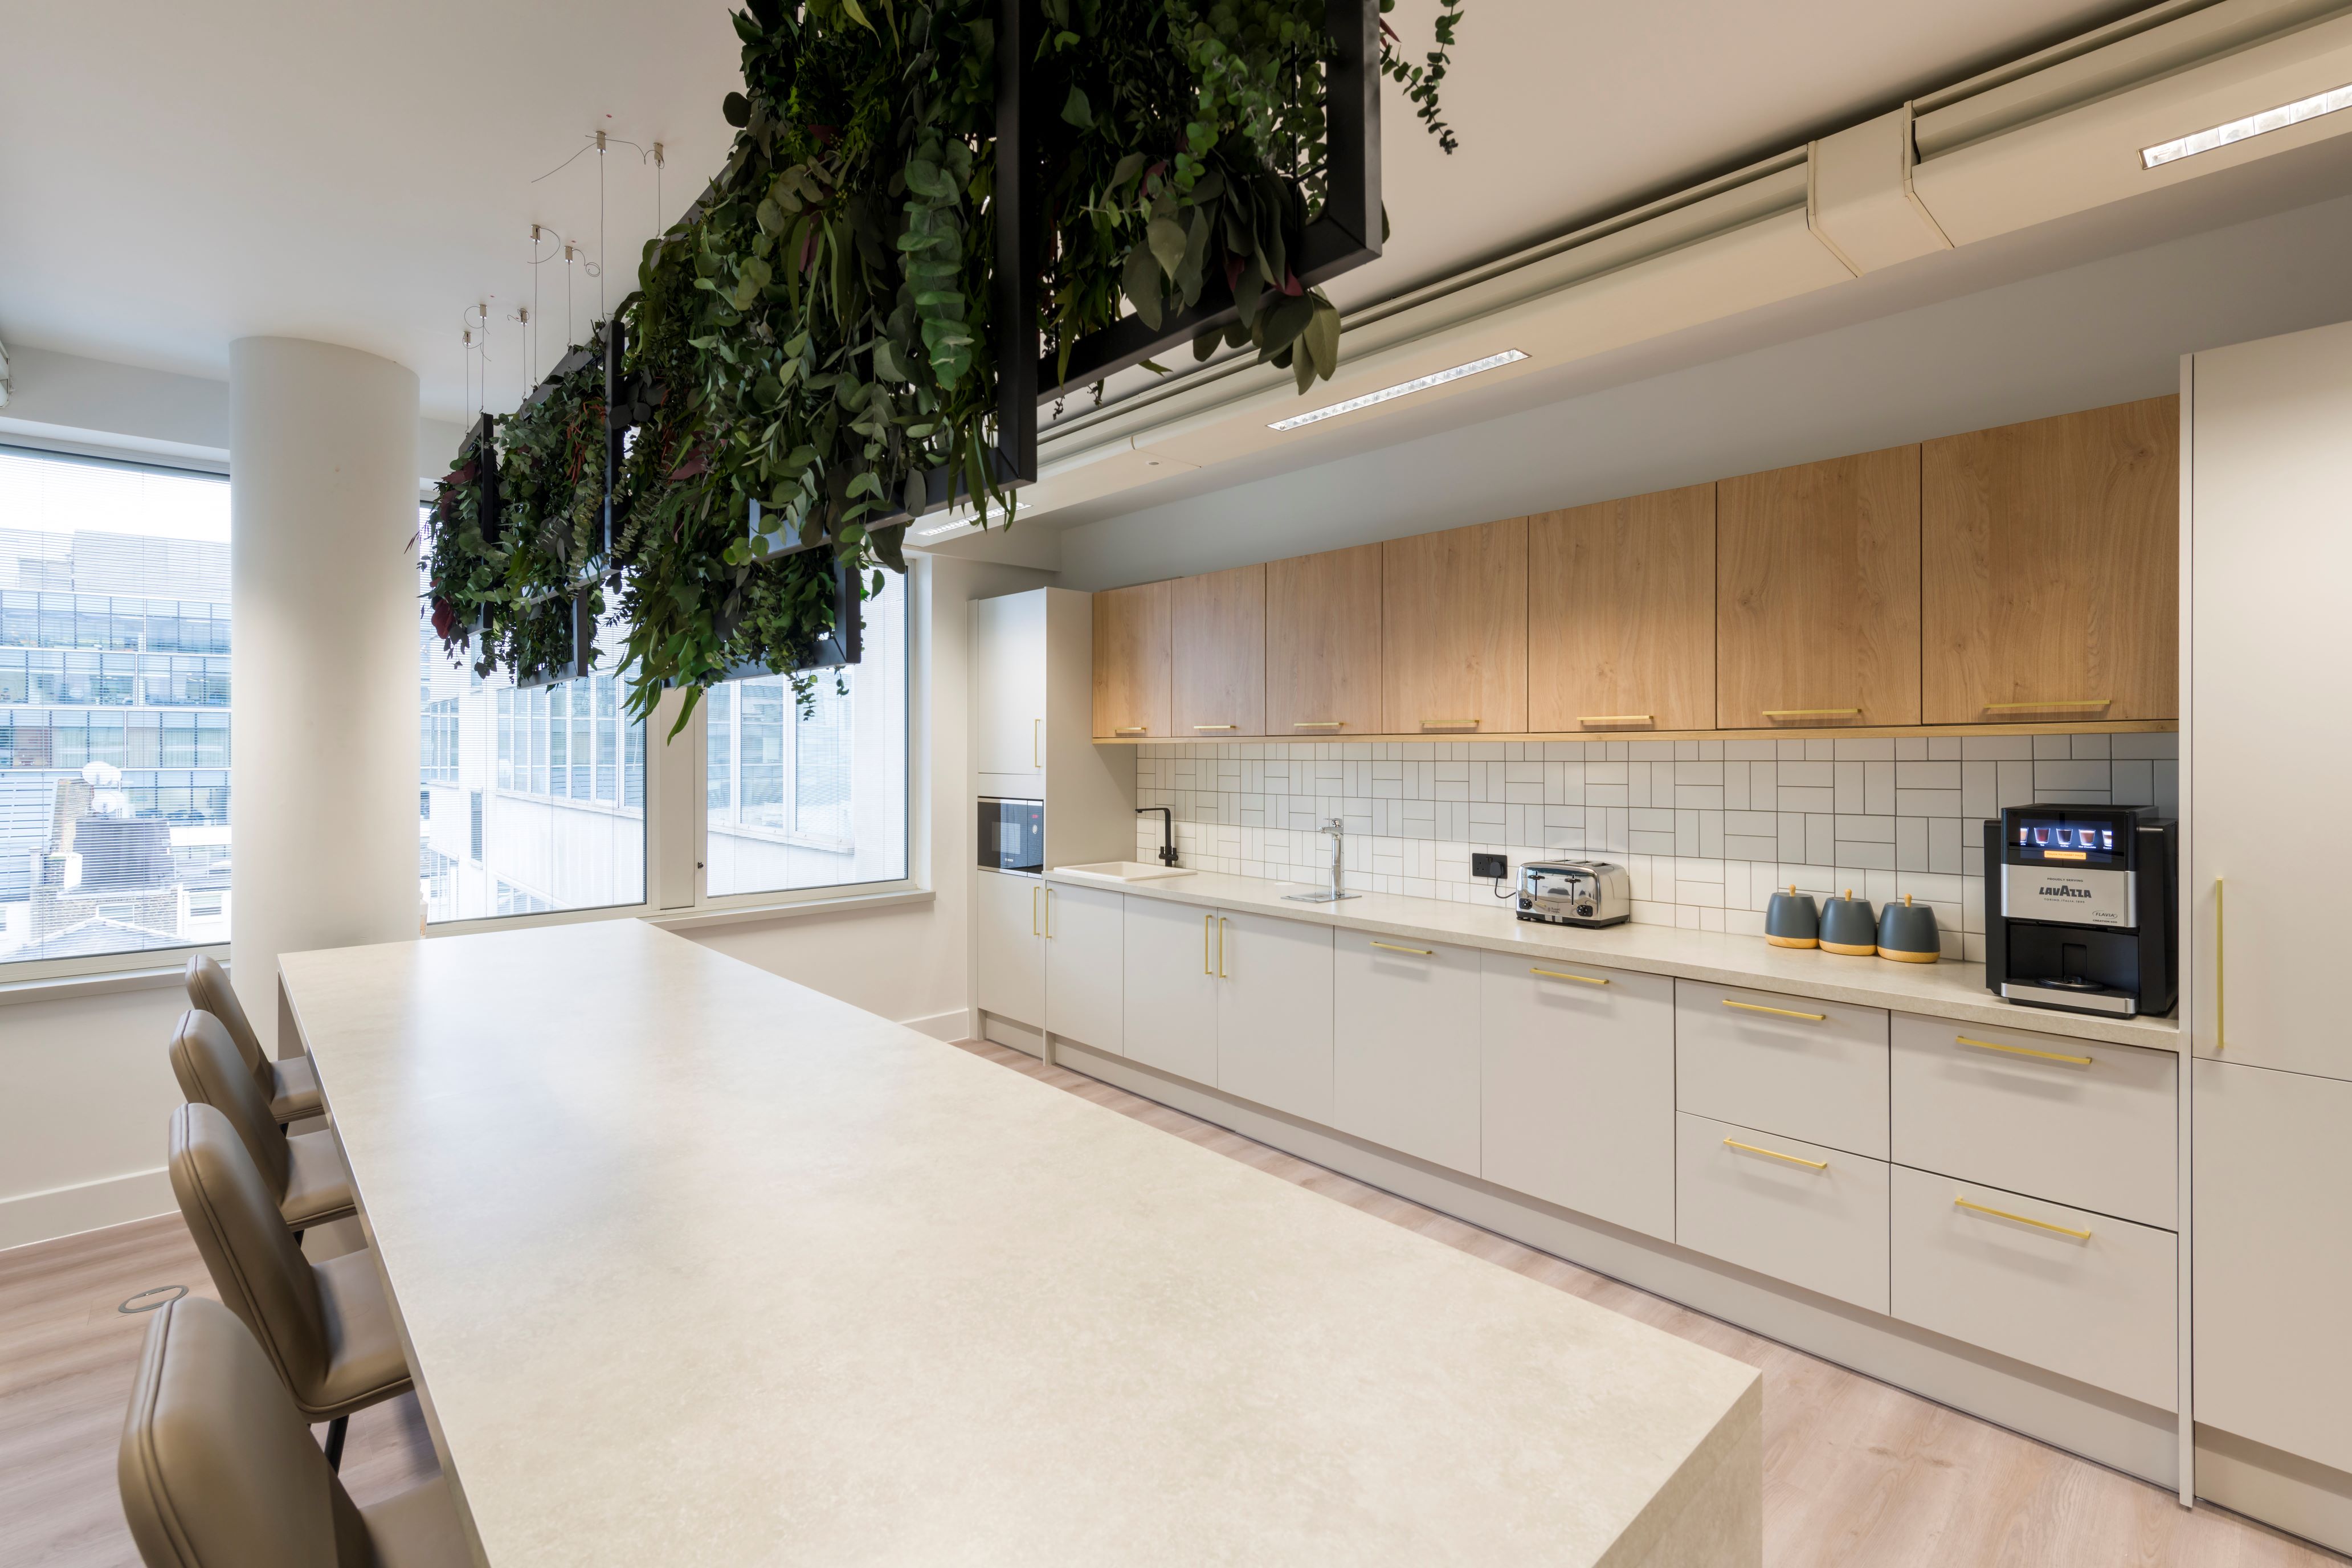 Canteen space with hanging foliage